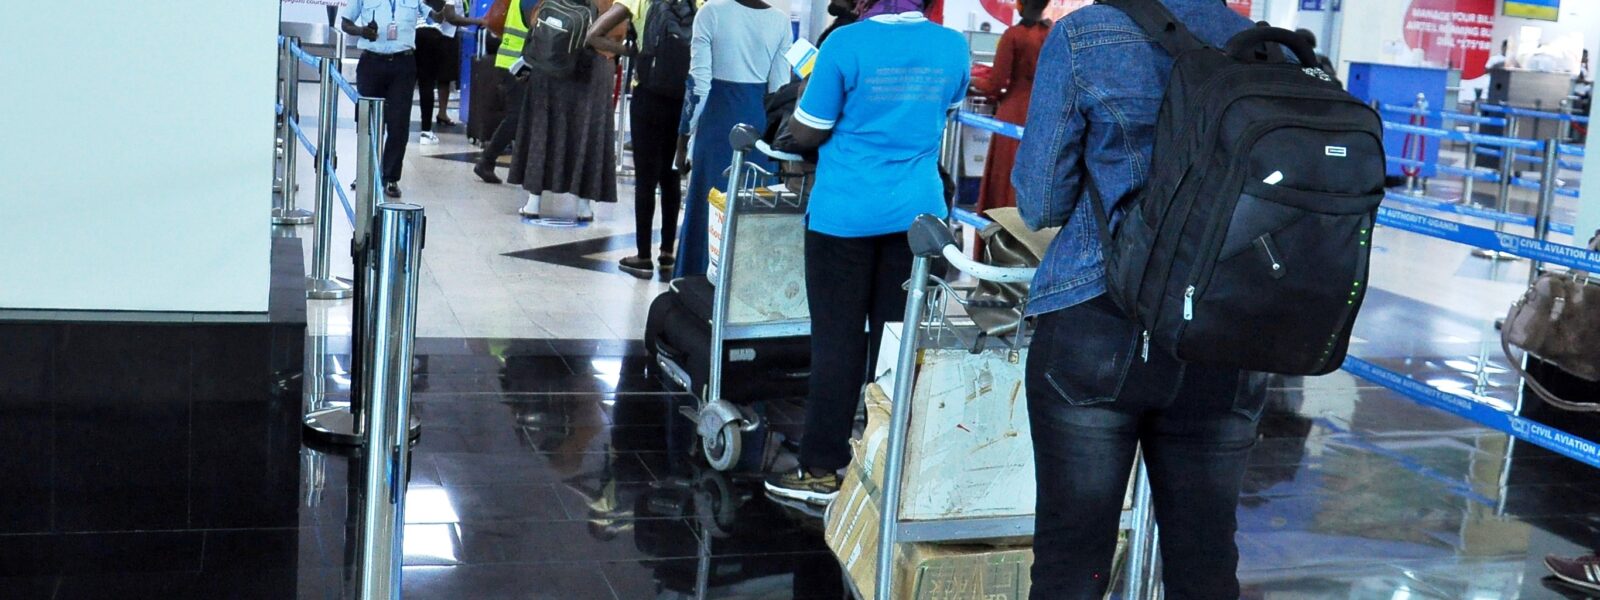 In 2 years, Entebbe Airport records highest passengers.